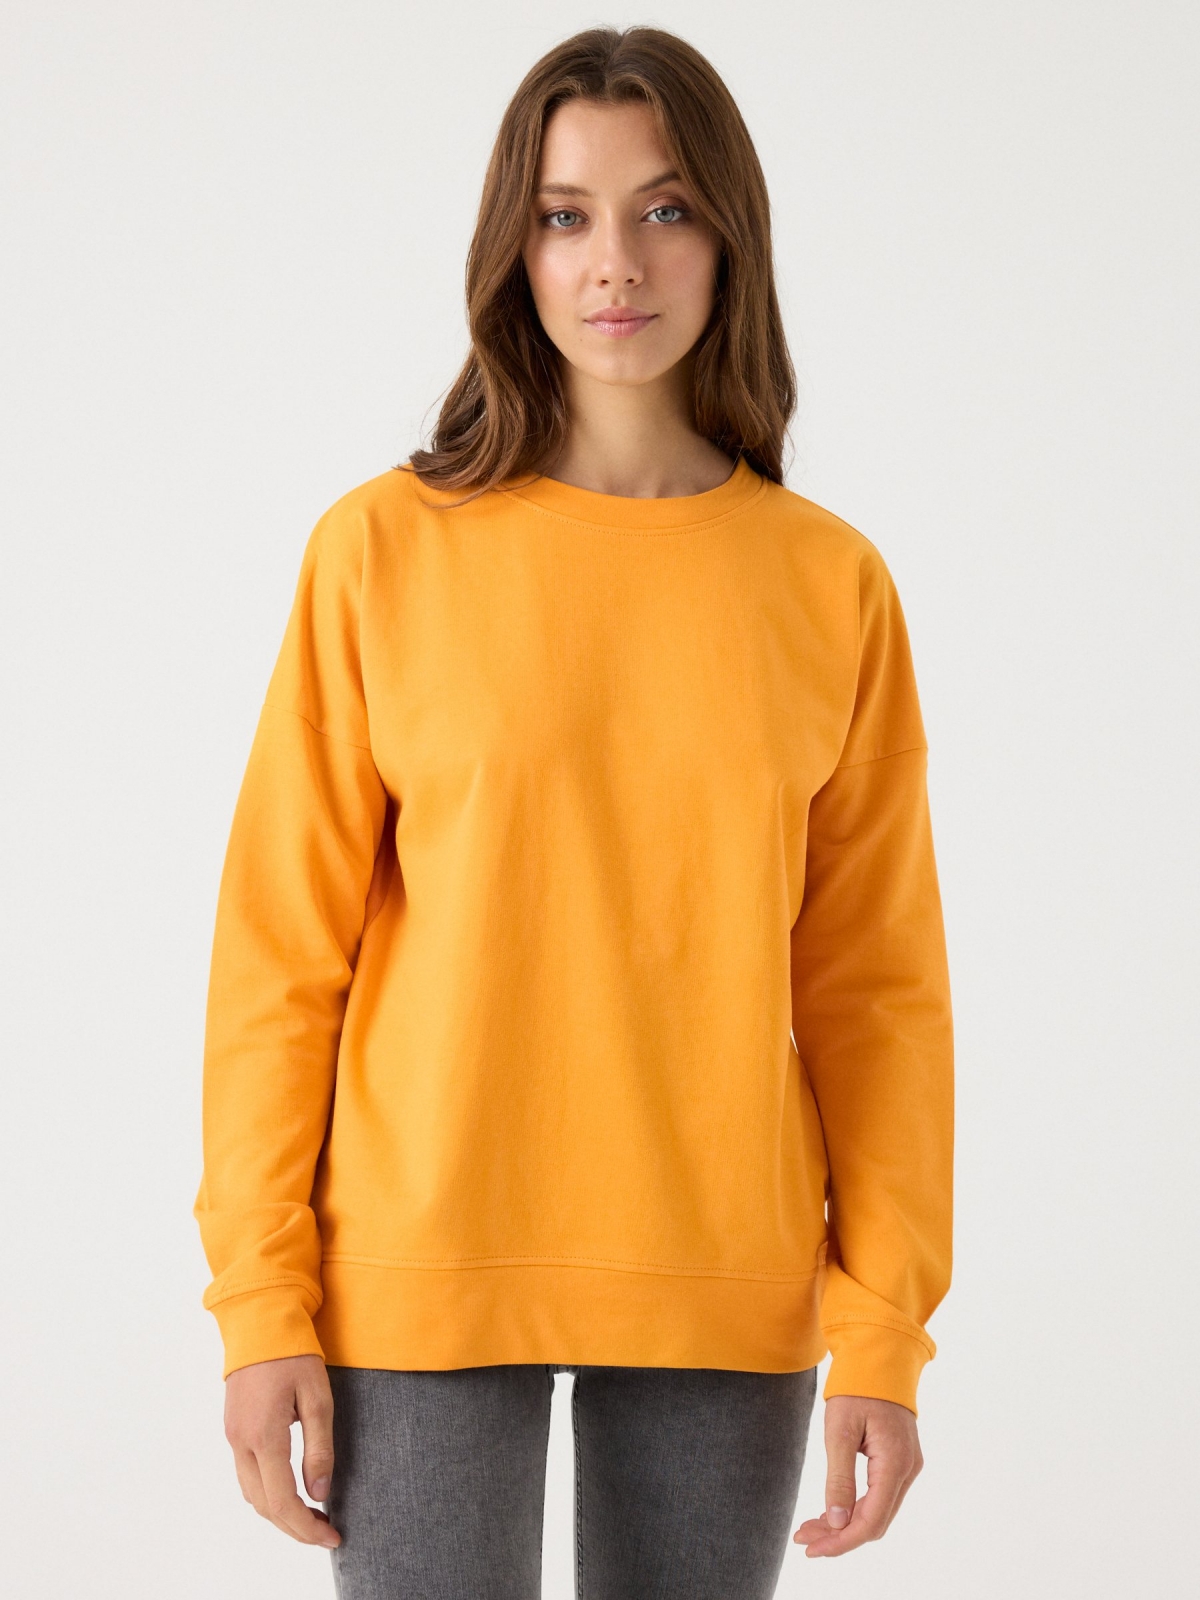 Basic round neck sweatshirt yellow middle front view